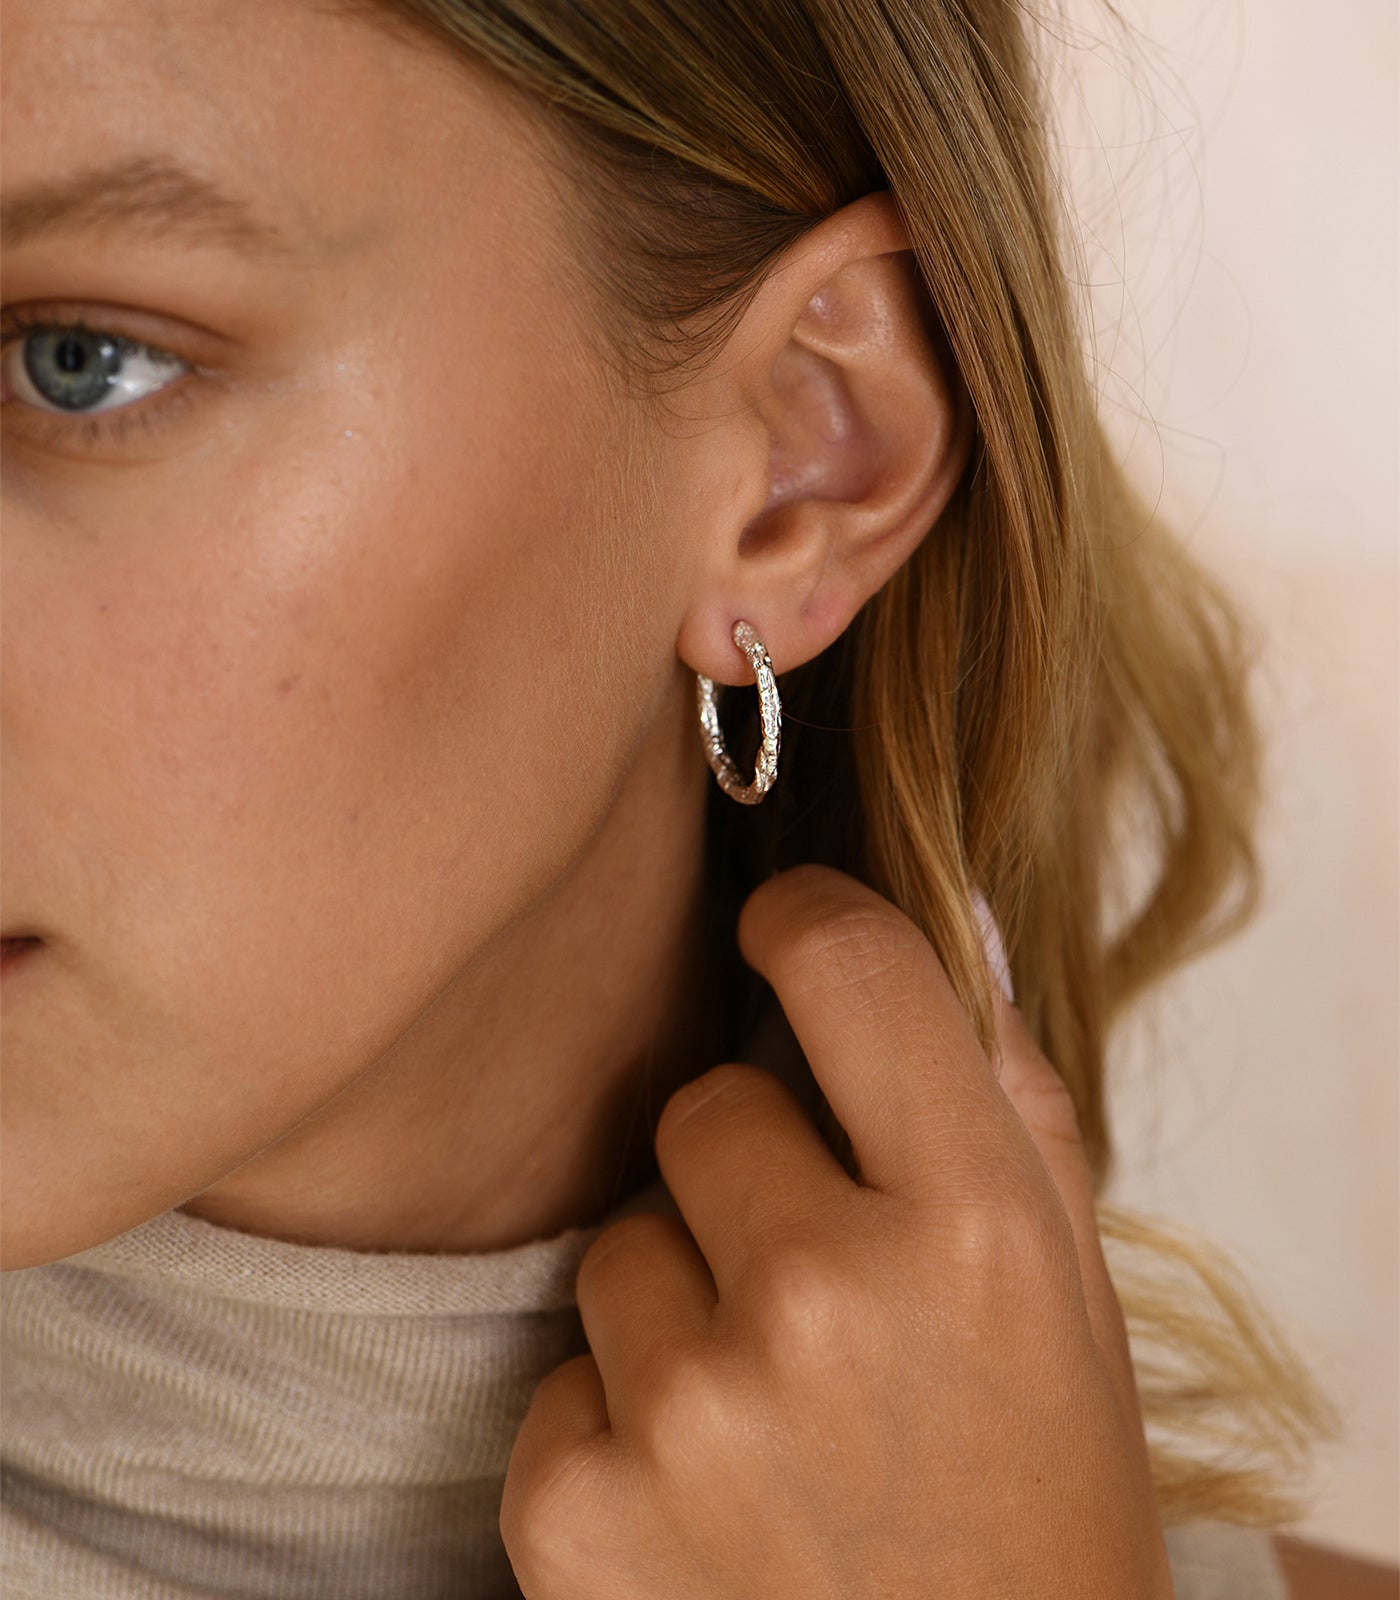 A sterling silver hoop earring. The hoop is smalll, thin and textured, creating a sophisticated design.